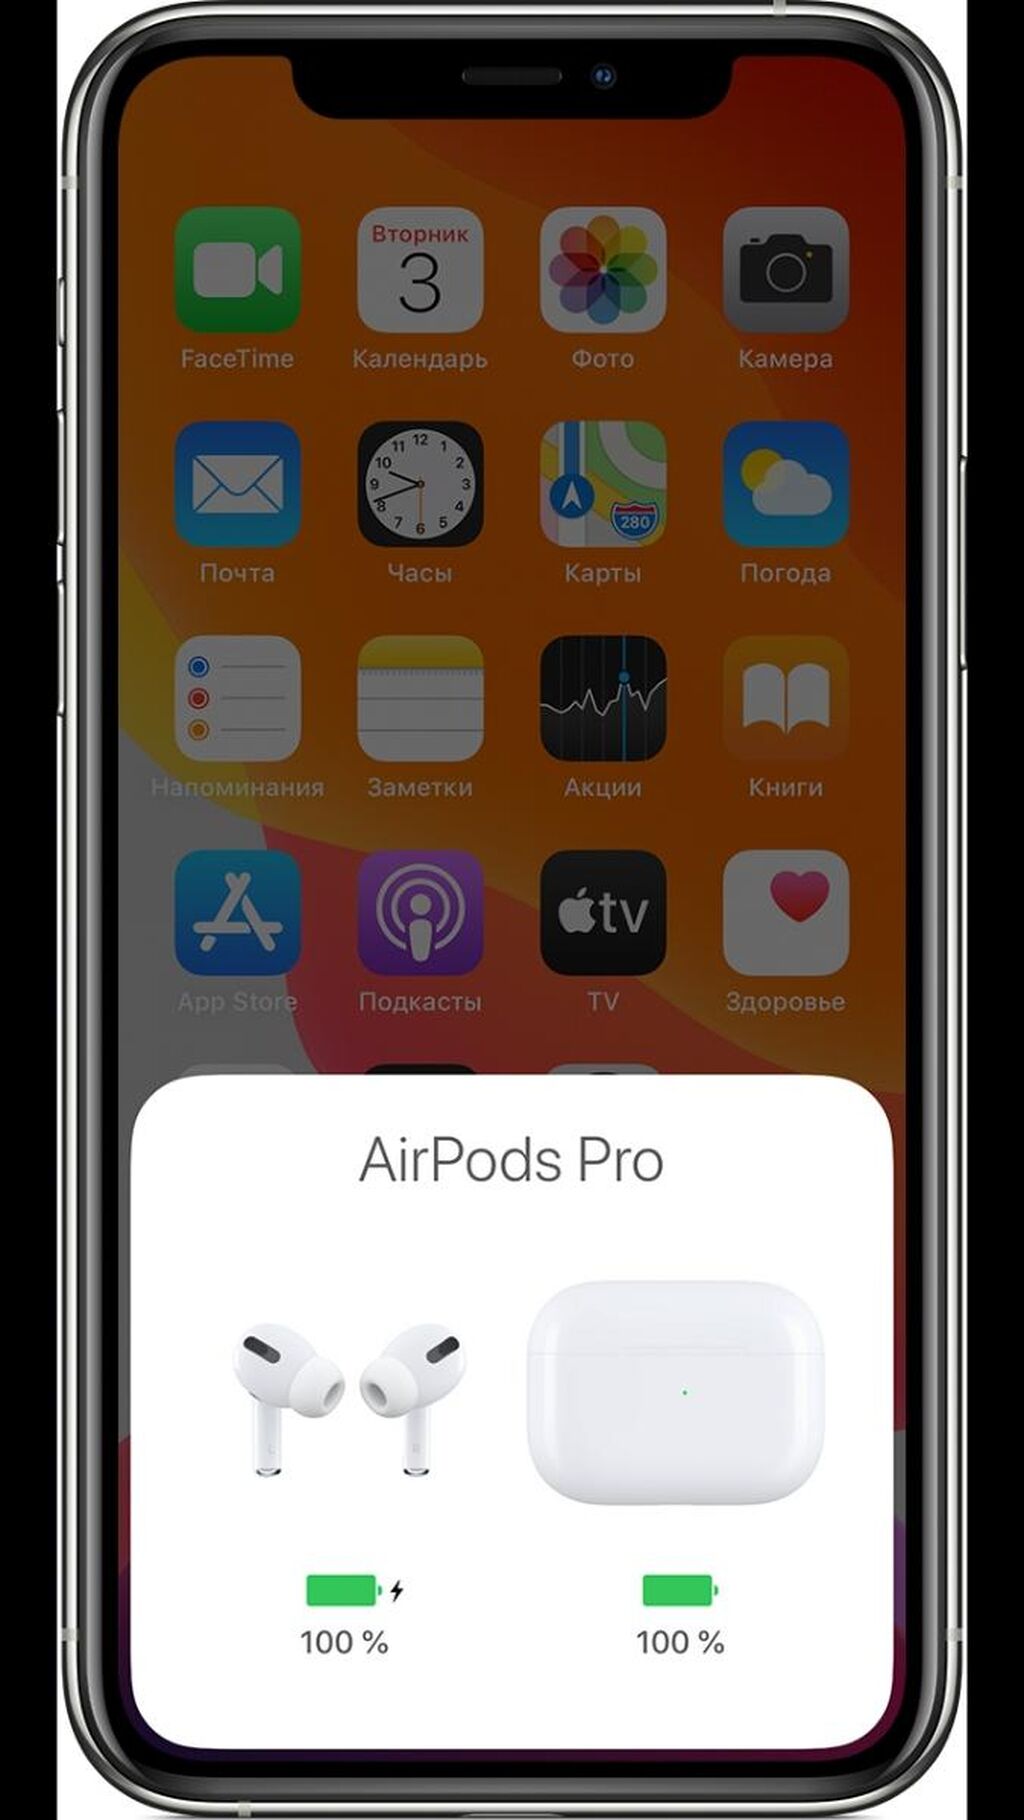 Airpods pro анимация. Iphone AIRPODS Pro. AIRPODS Pro 2 анимация. Наушники AIRPODS экран айфона. Анимация AIRPODS Pro iphone.